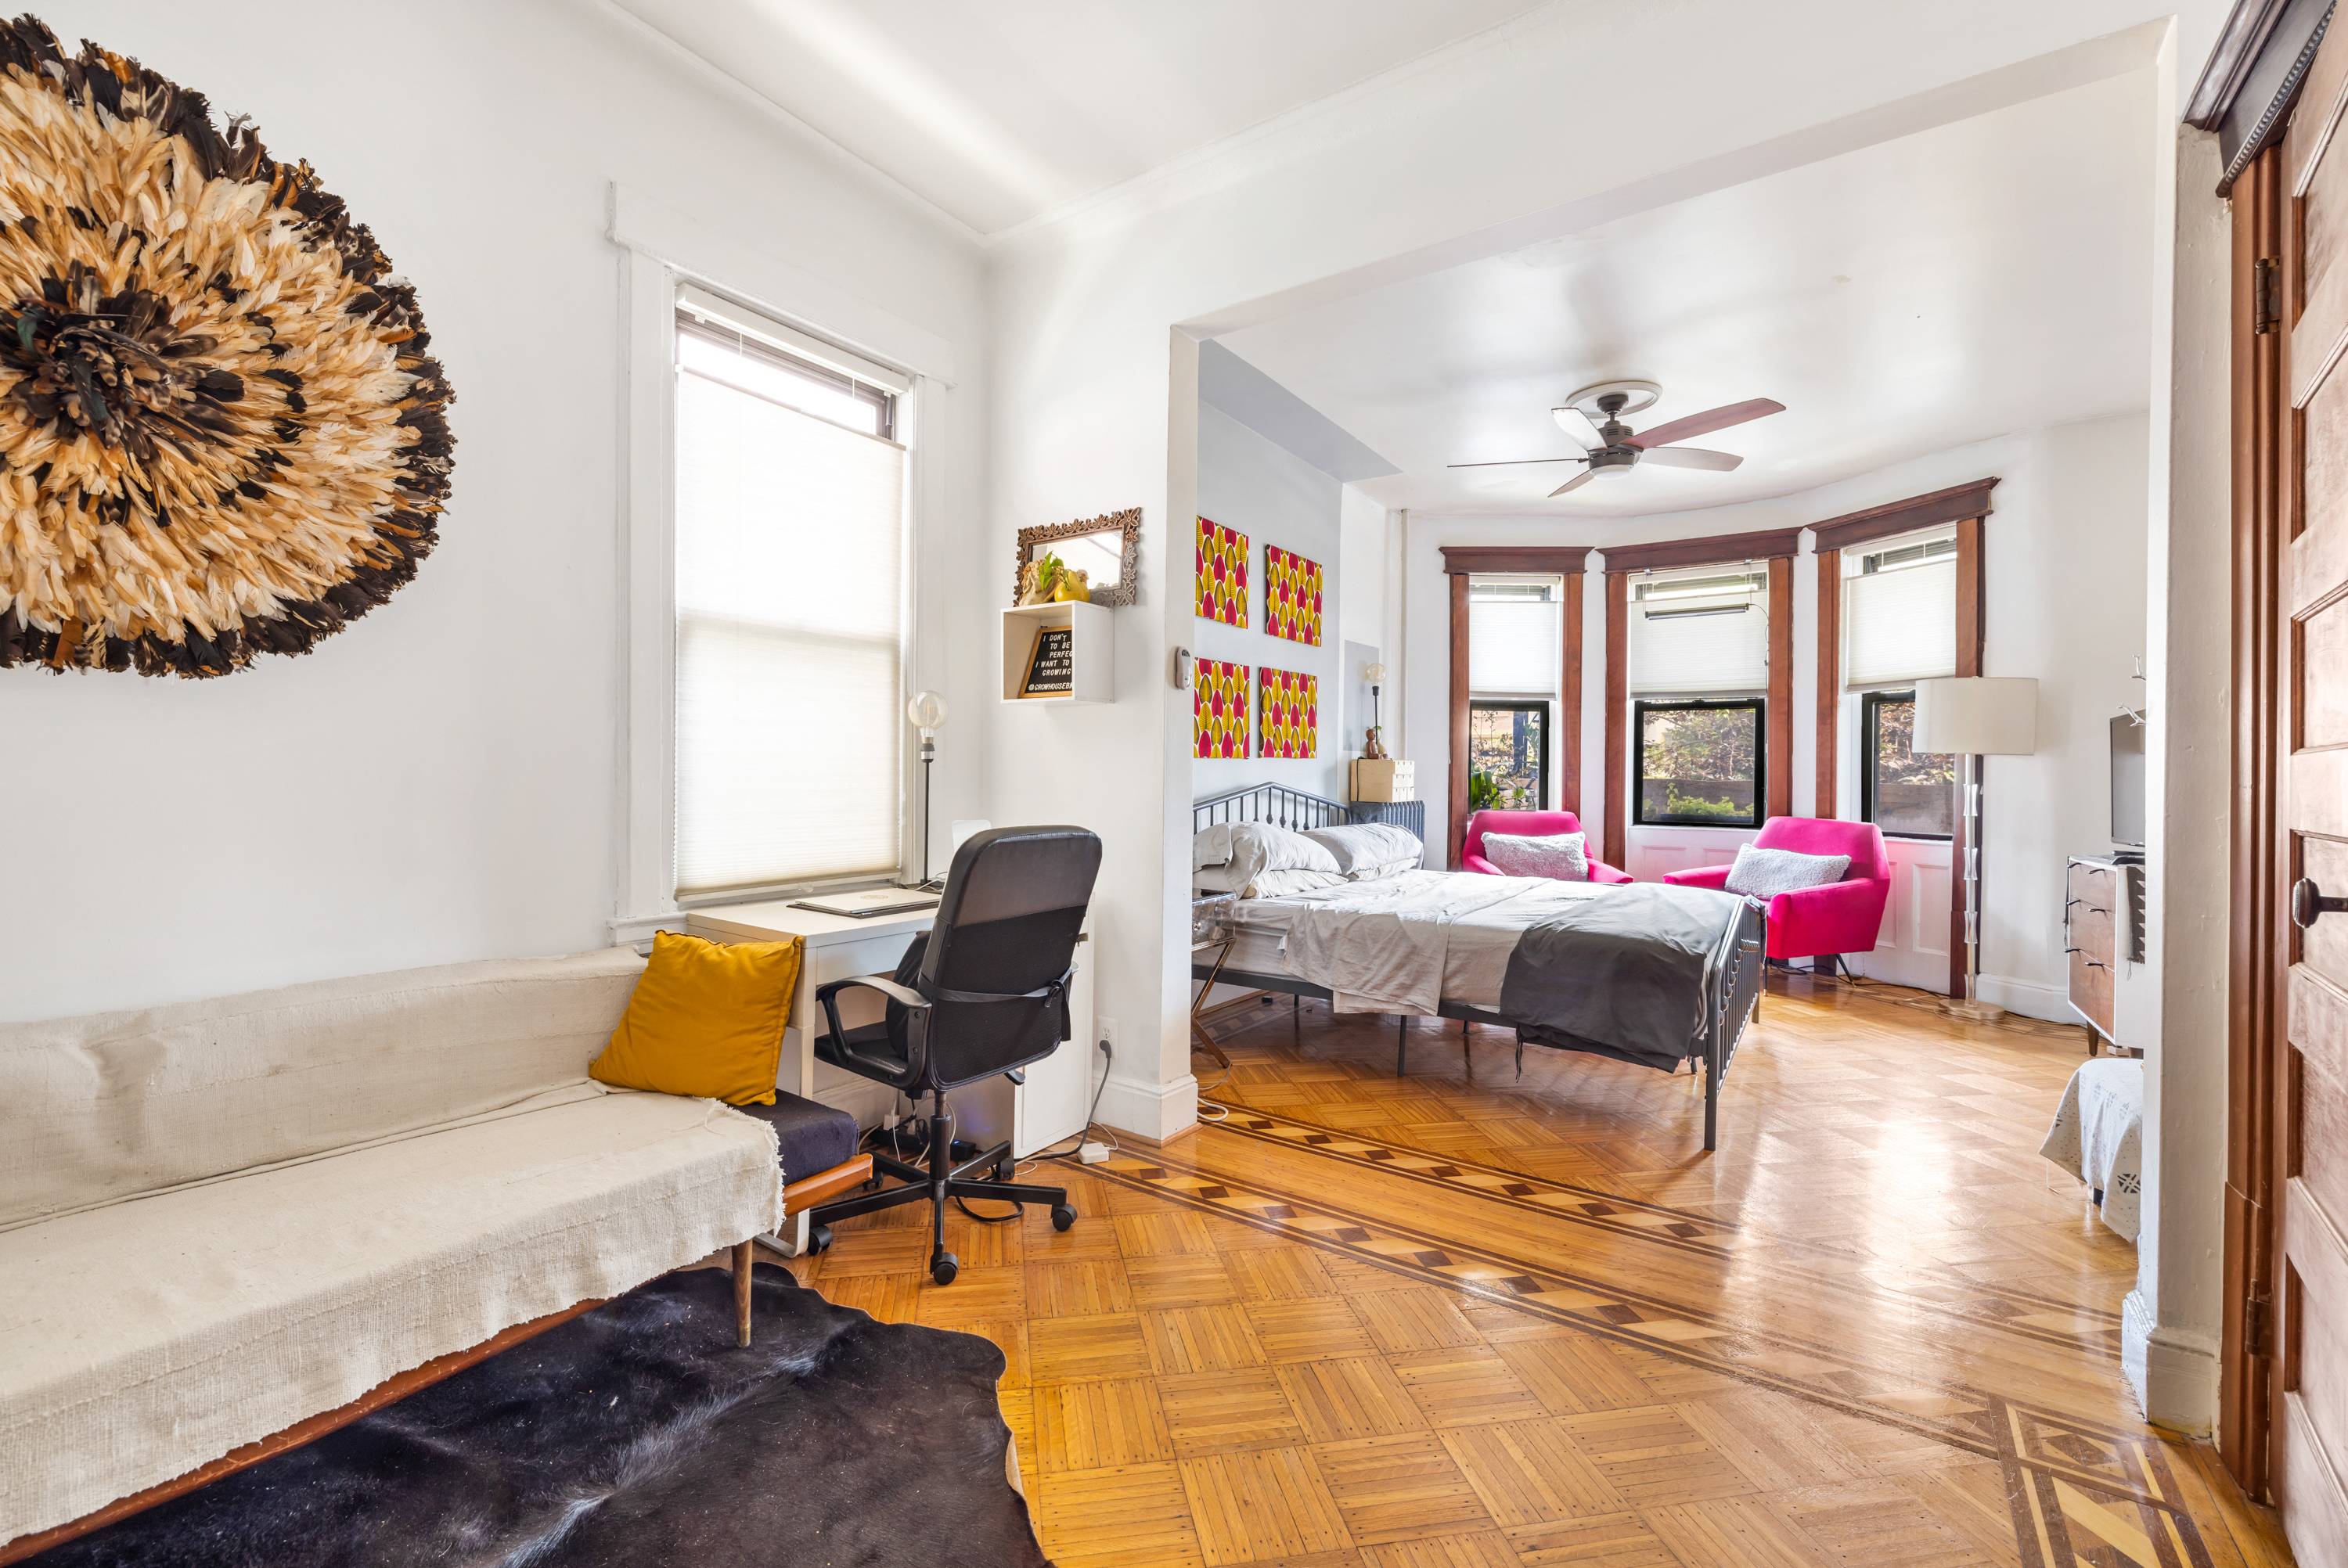 Showing by appointment Spacious and airy are the two words that come to mind when you see this large 2 family brick home at 66 Kenilworth Place in Flatbush !